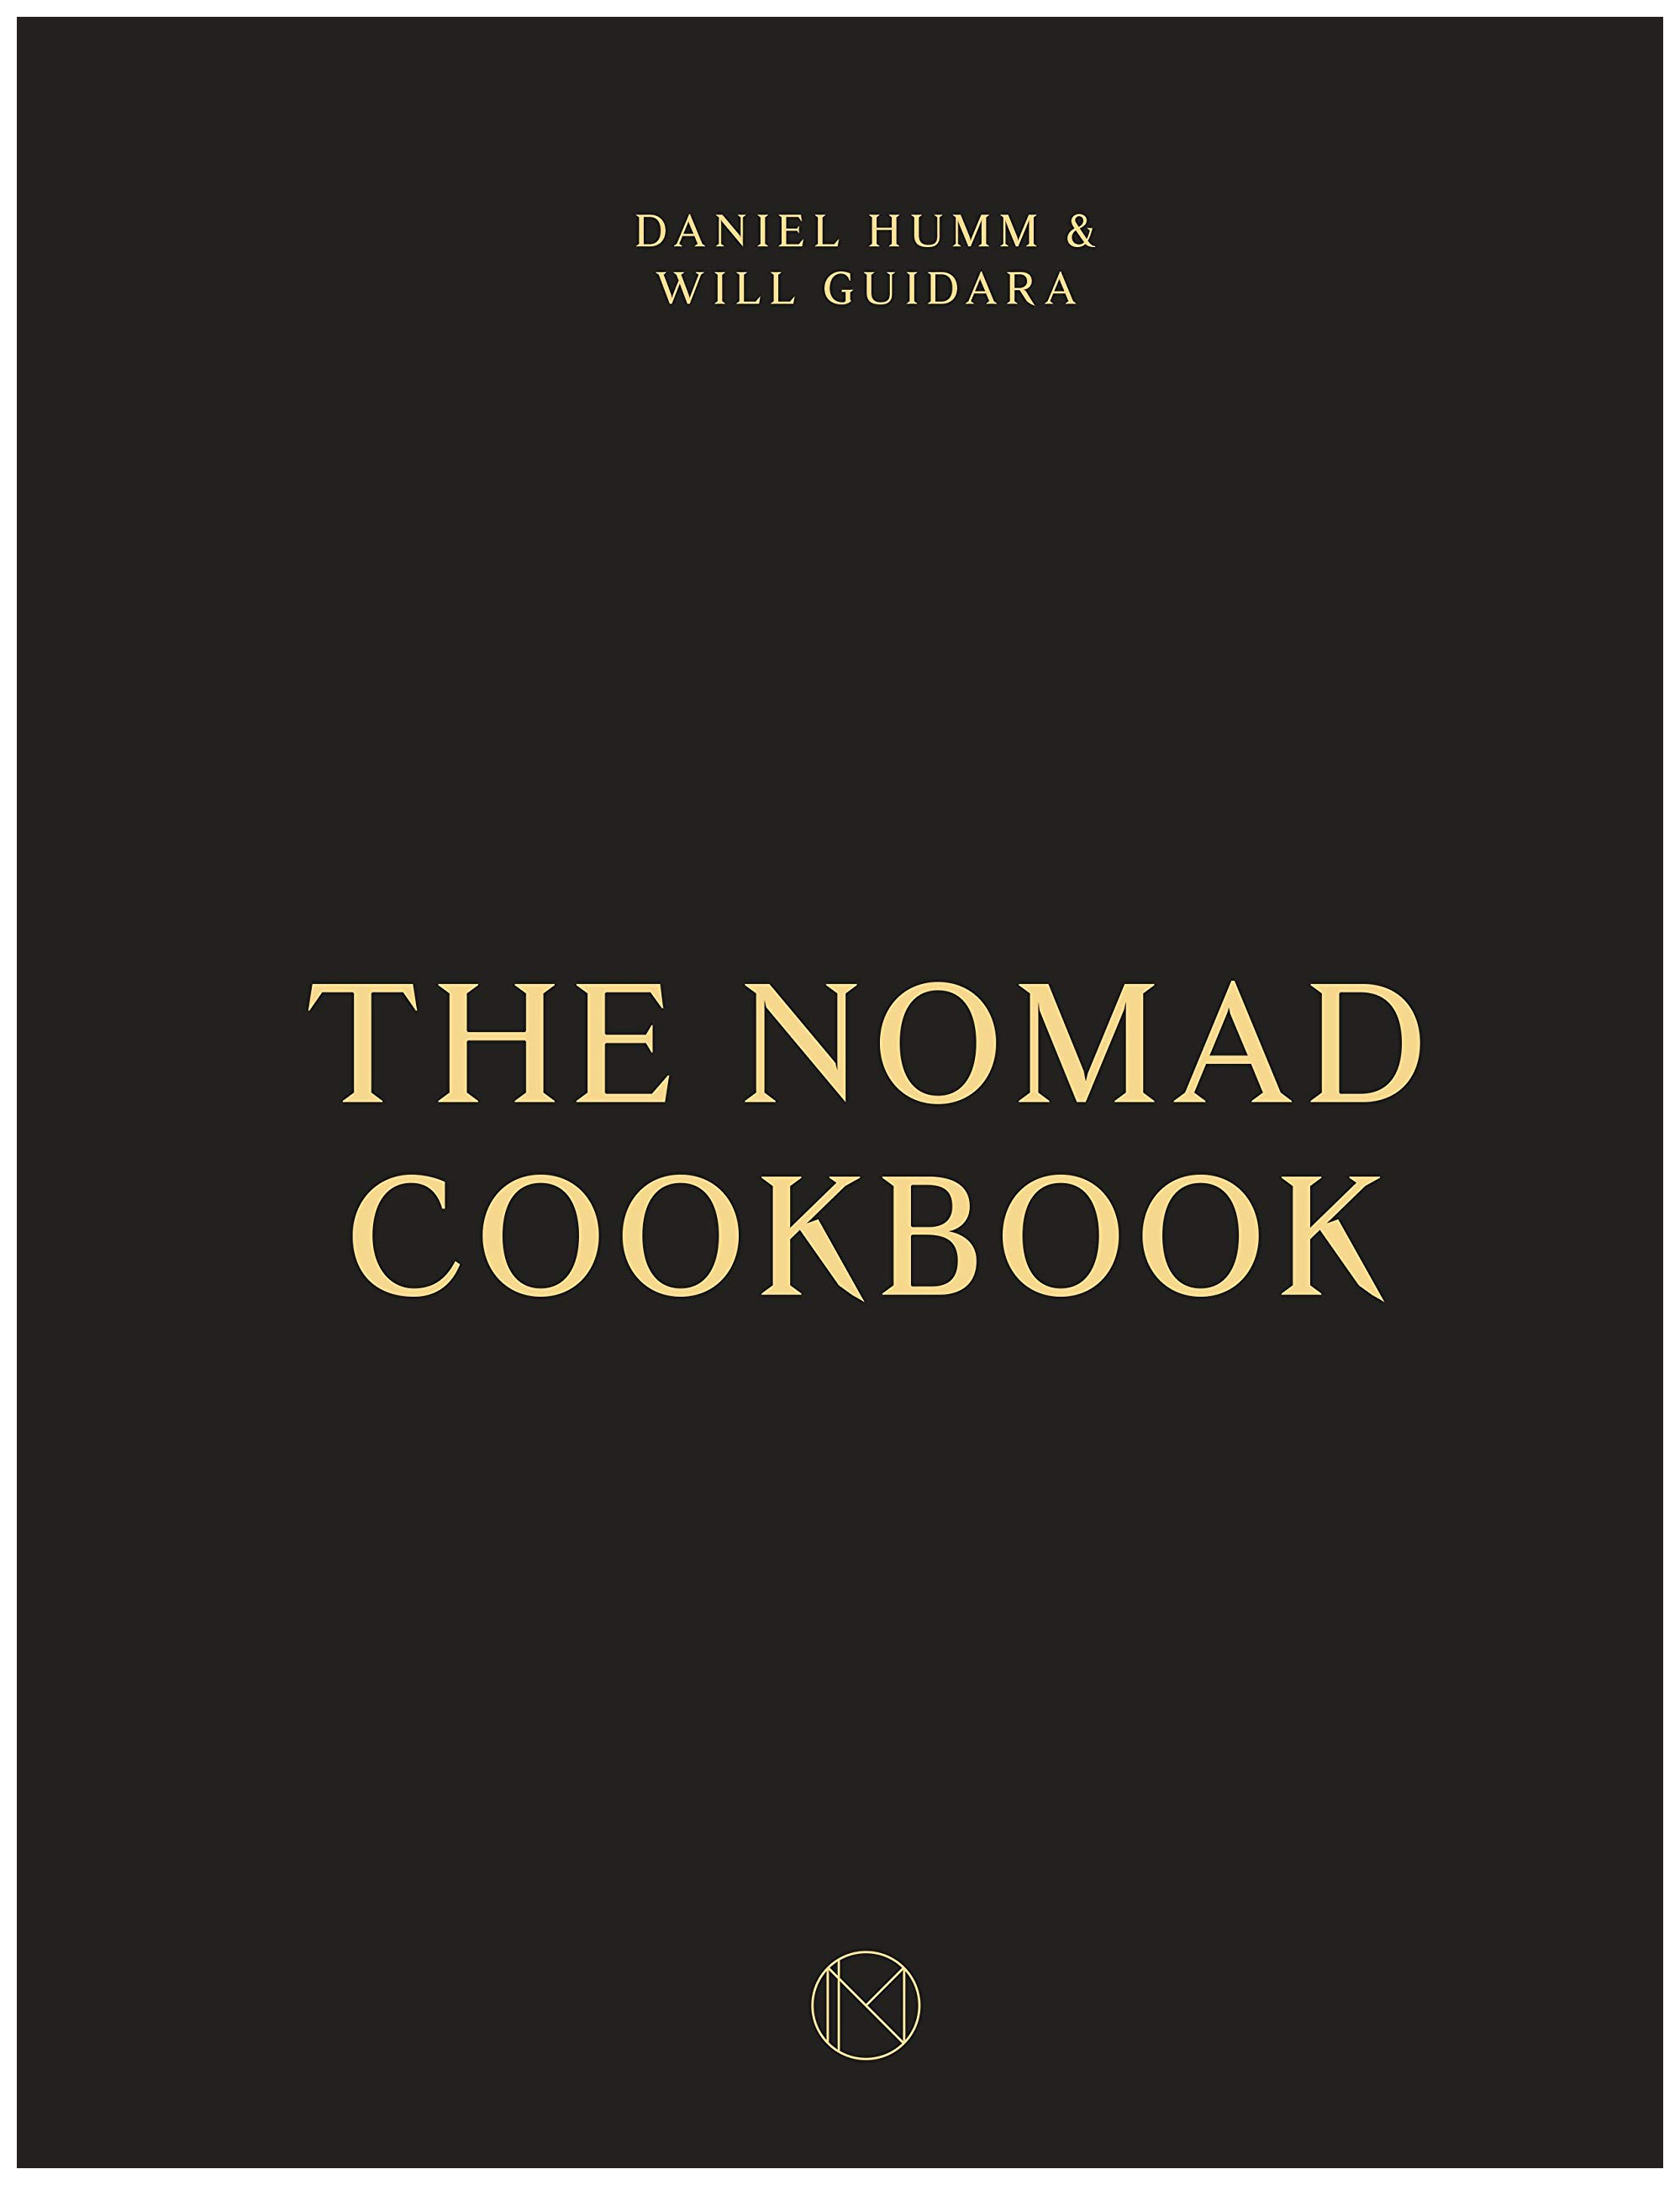  - The NoMad Cookbook by Daniel Humm